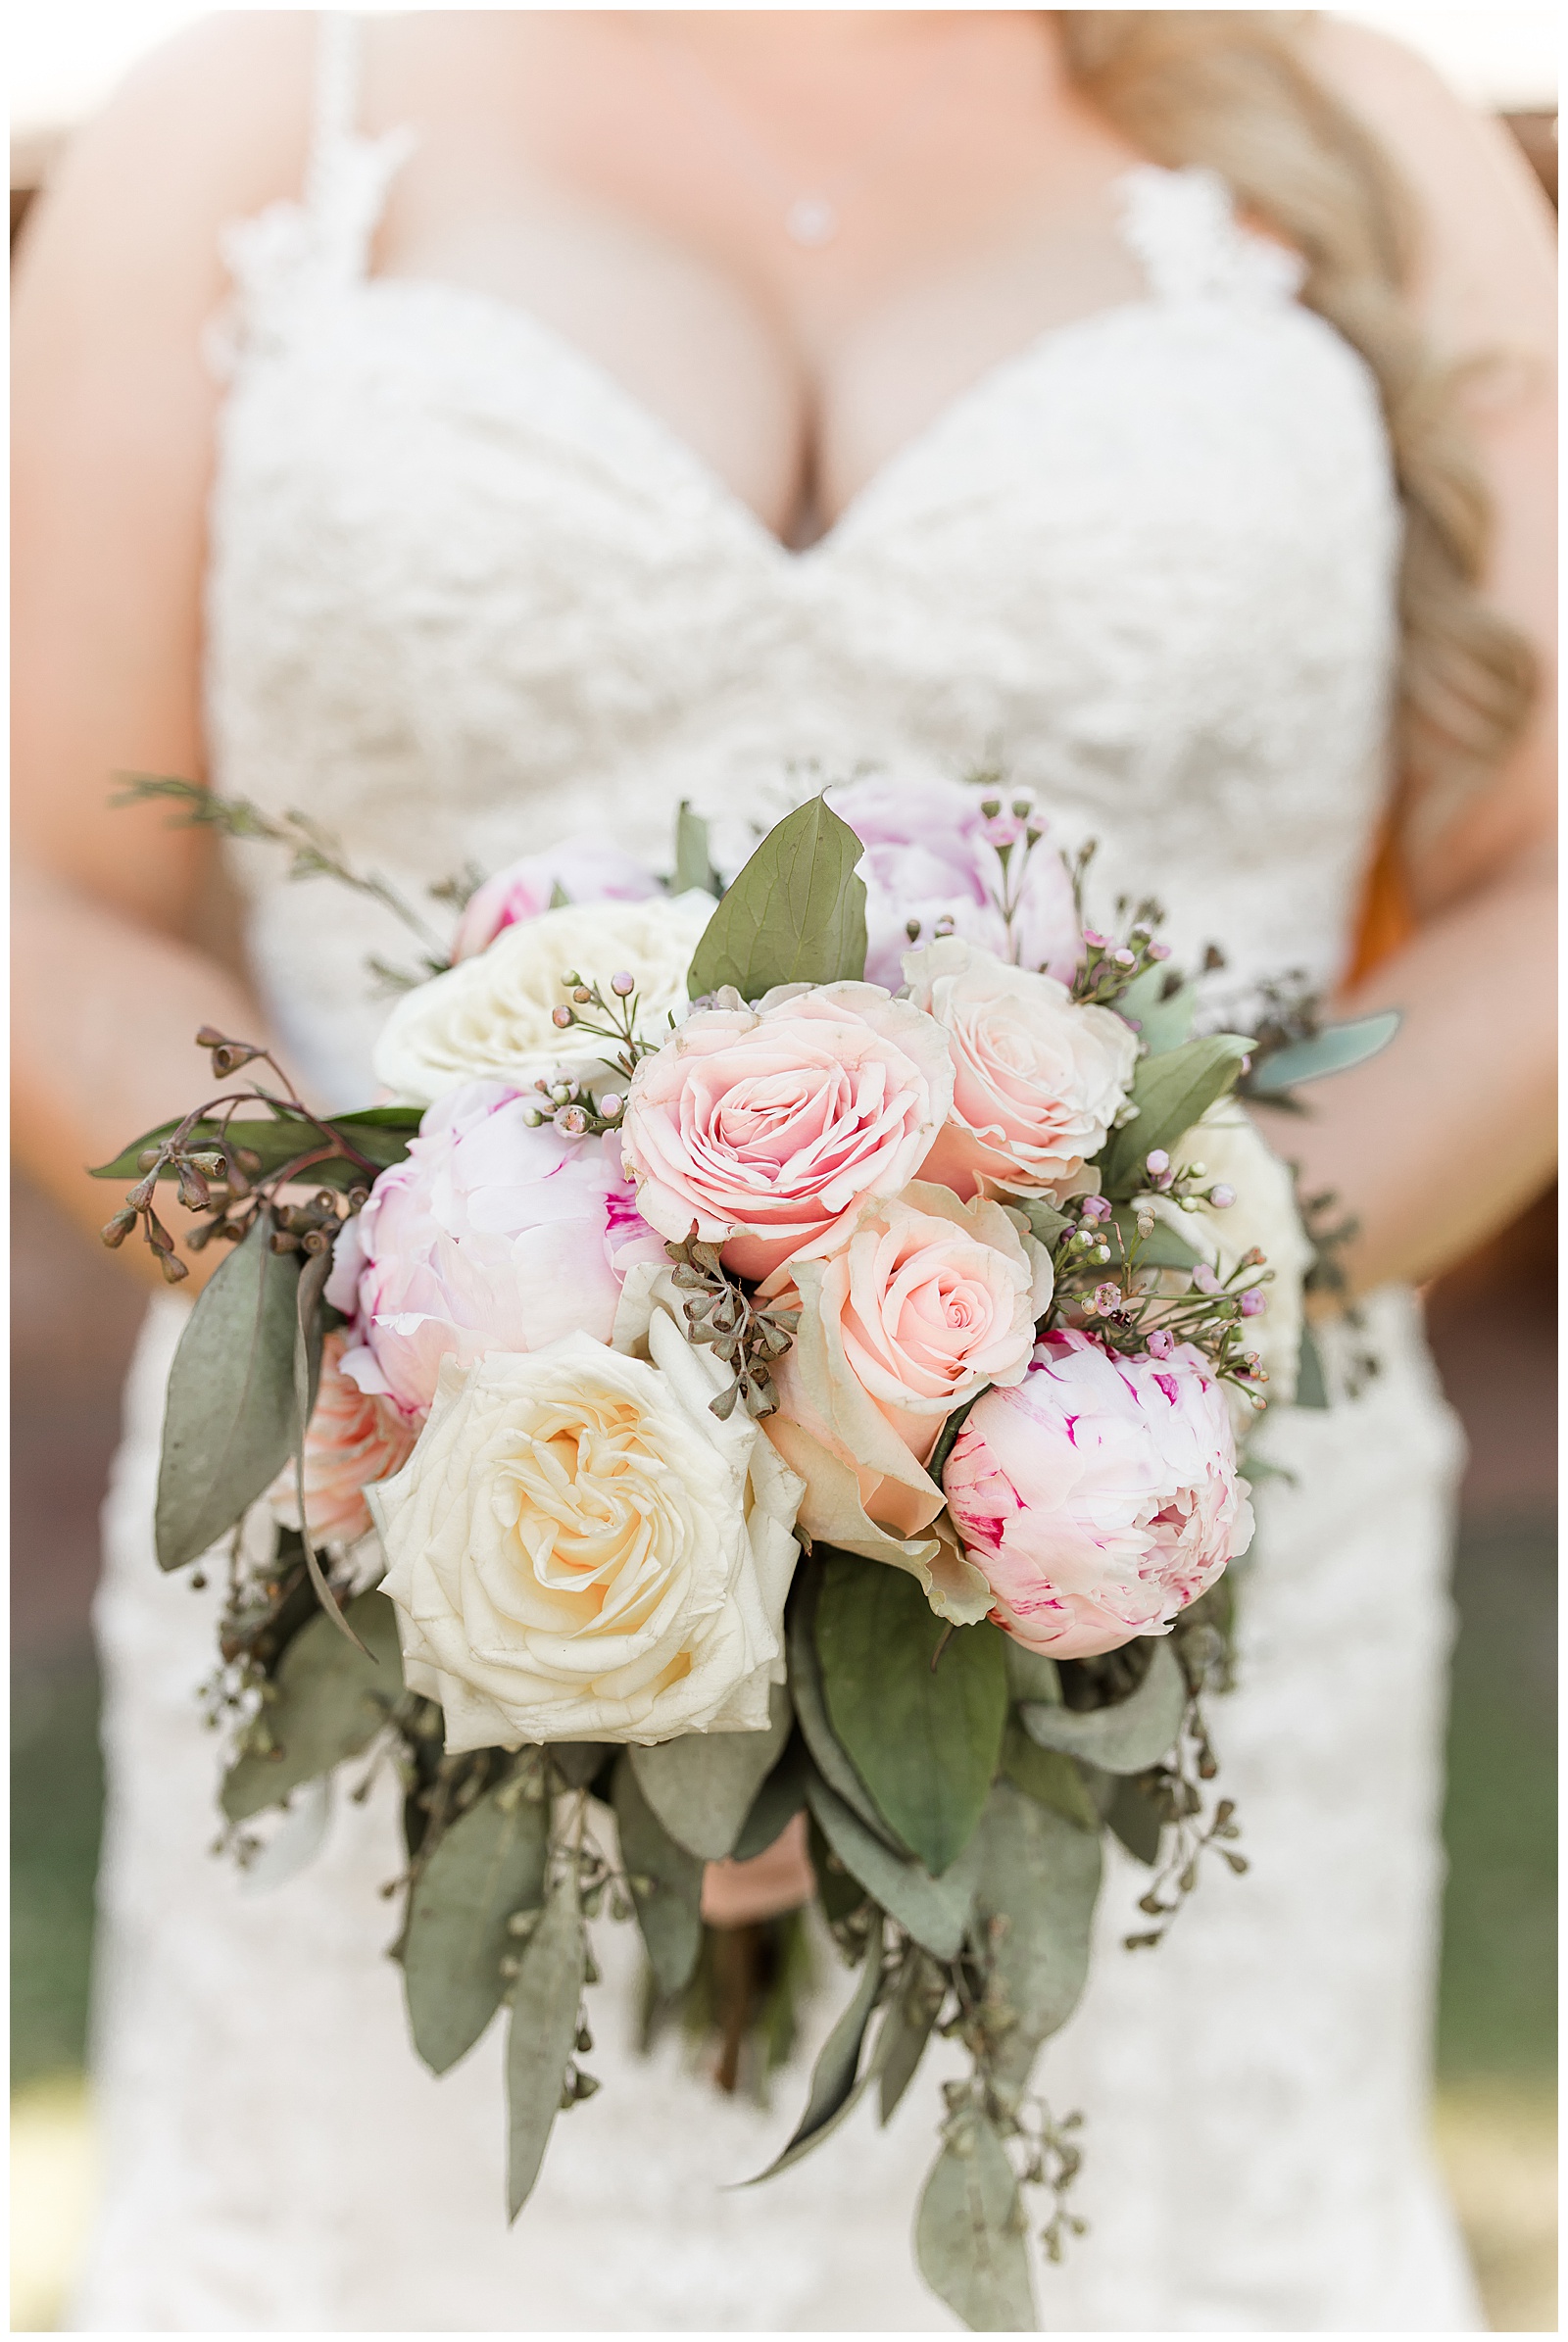 Bride holding bouquet at her intimate wedding